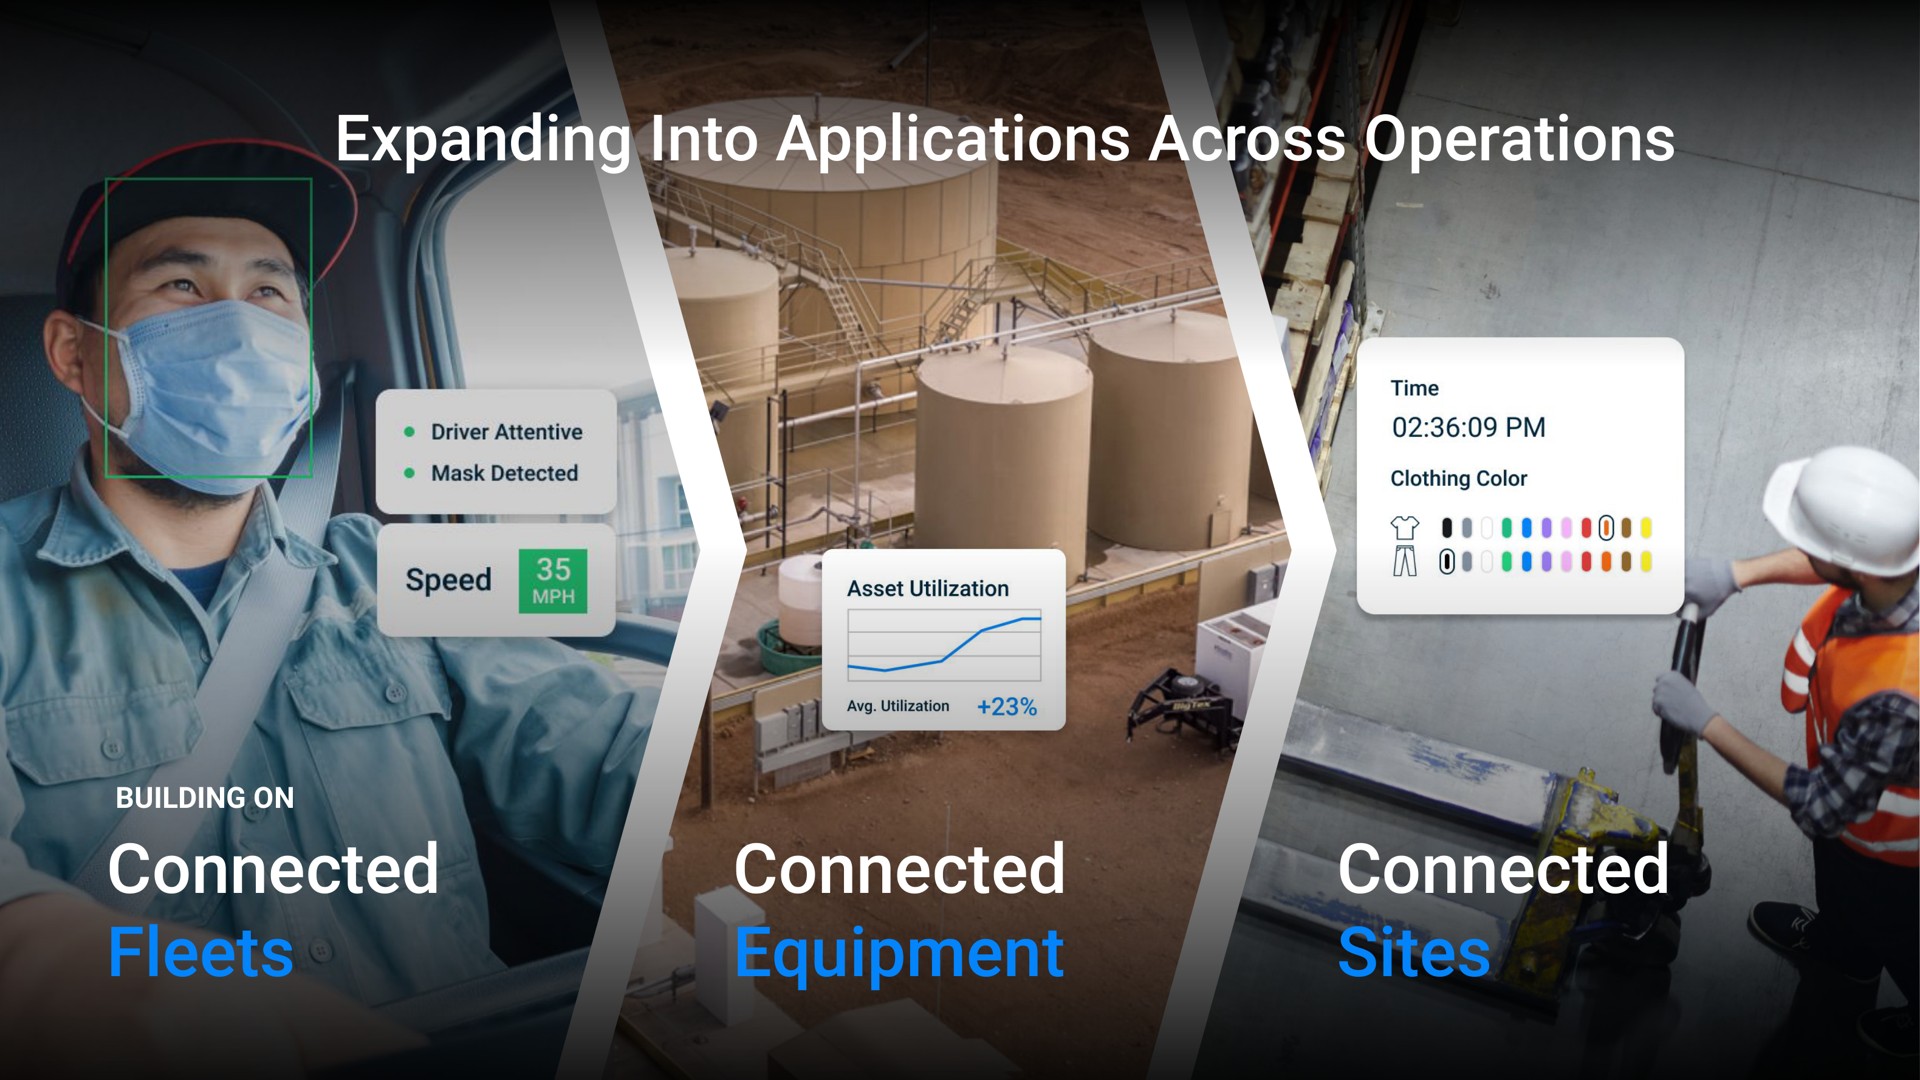 expanding into applications across operations connected fleets connected equipment connected sites eels building on | Samsara